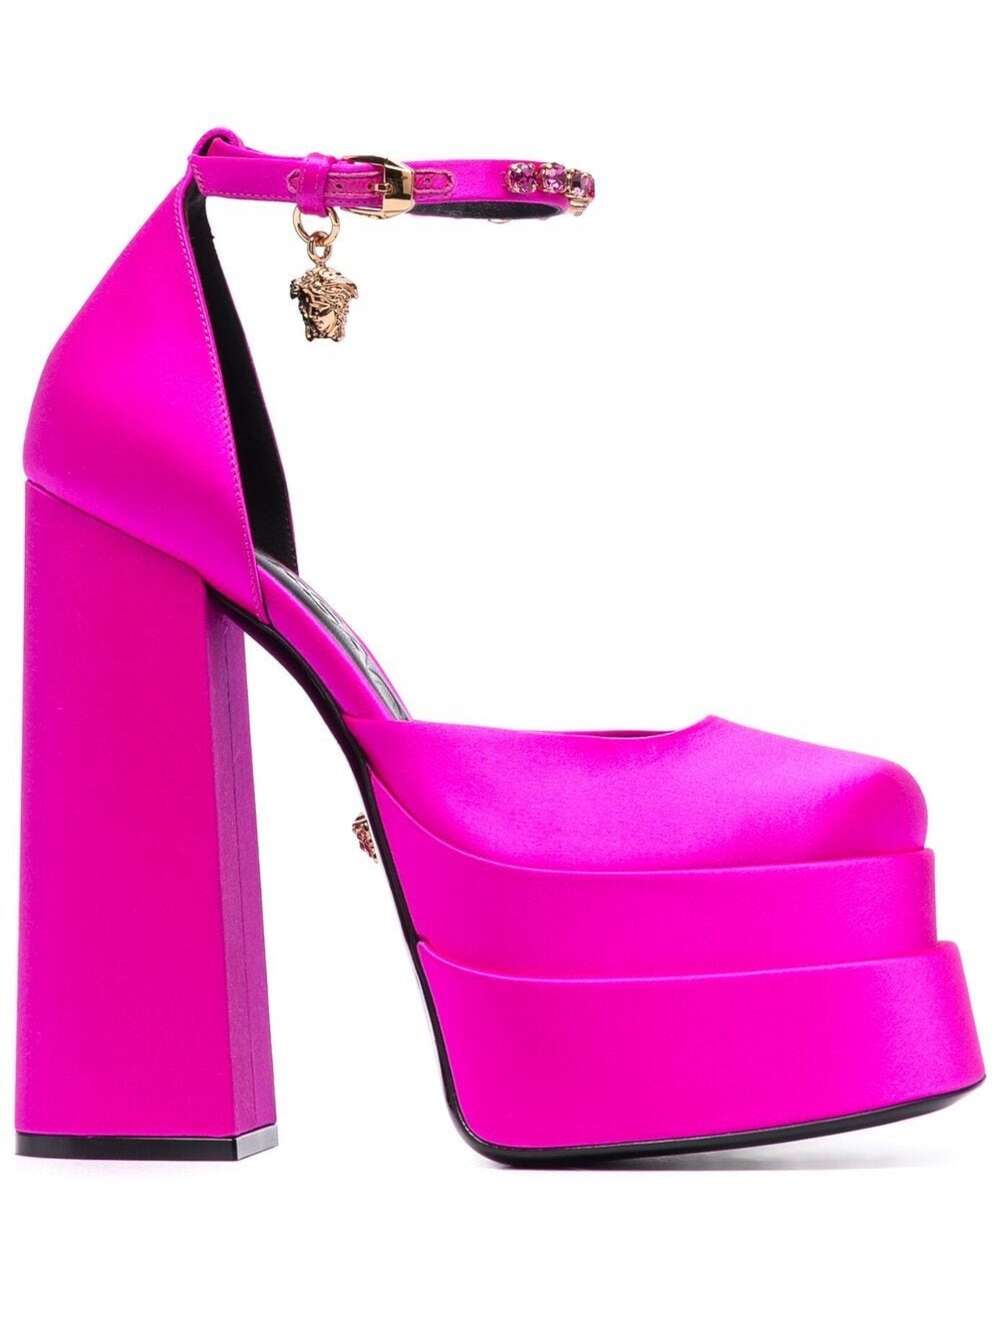 VERSACE AEVITAS FUCHSIA PUMPS WITH MEDUSA CHARM AND PLATFORM IN SILK BLEND WOMAN